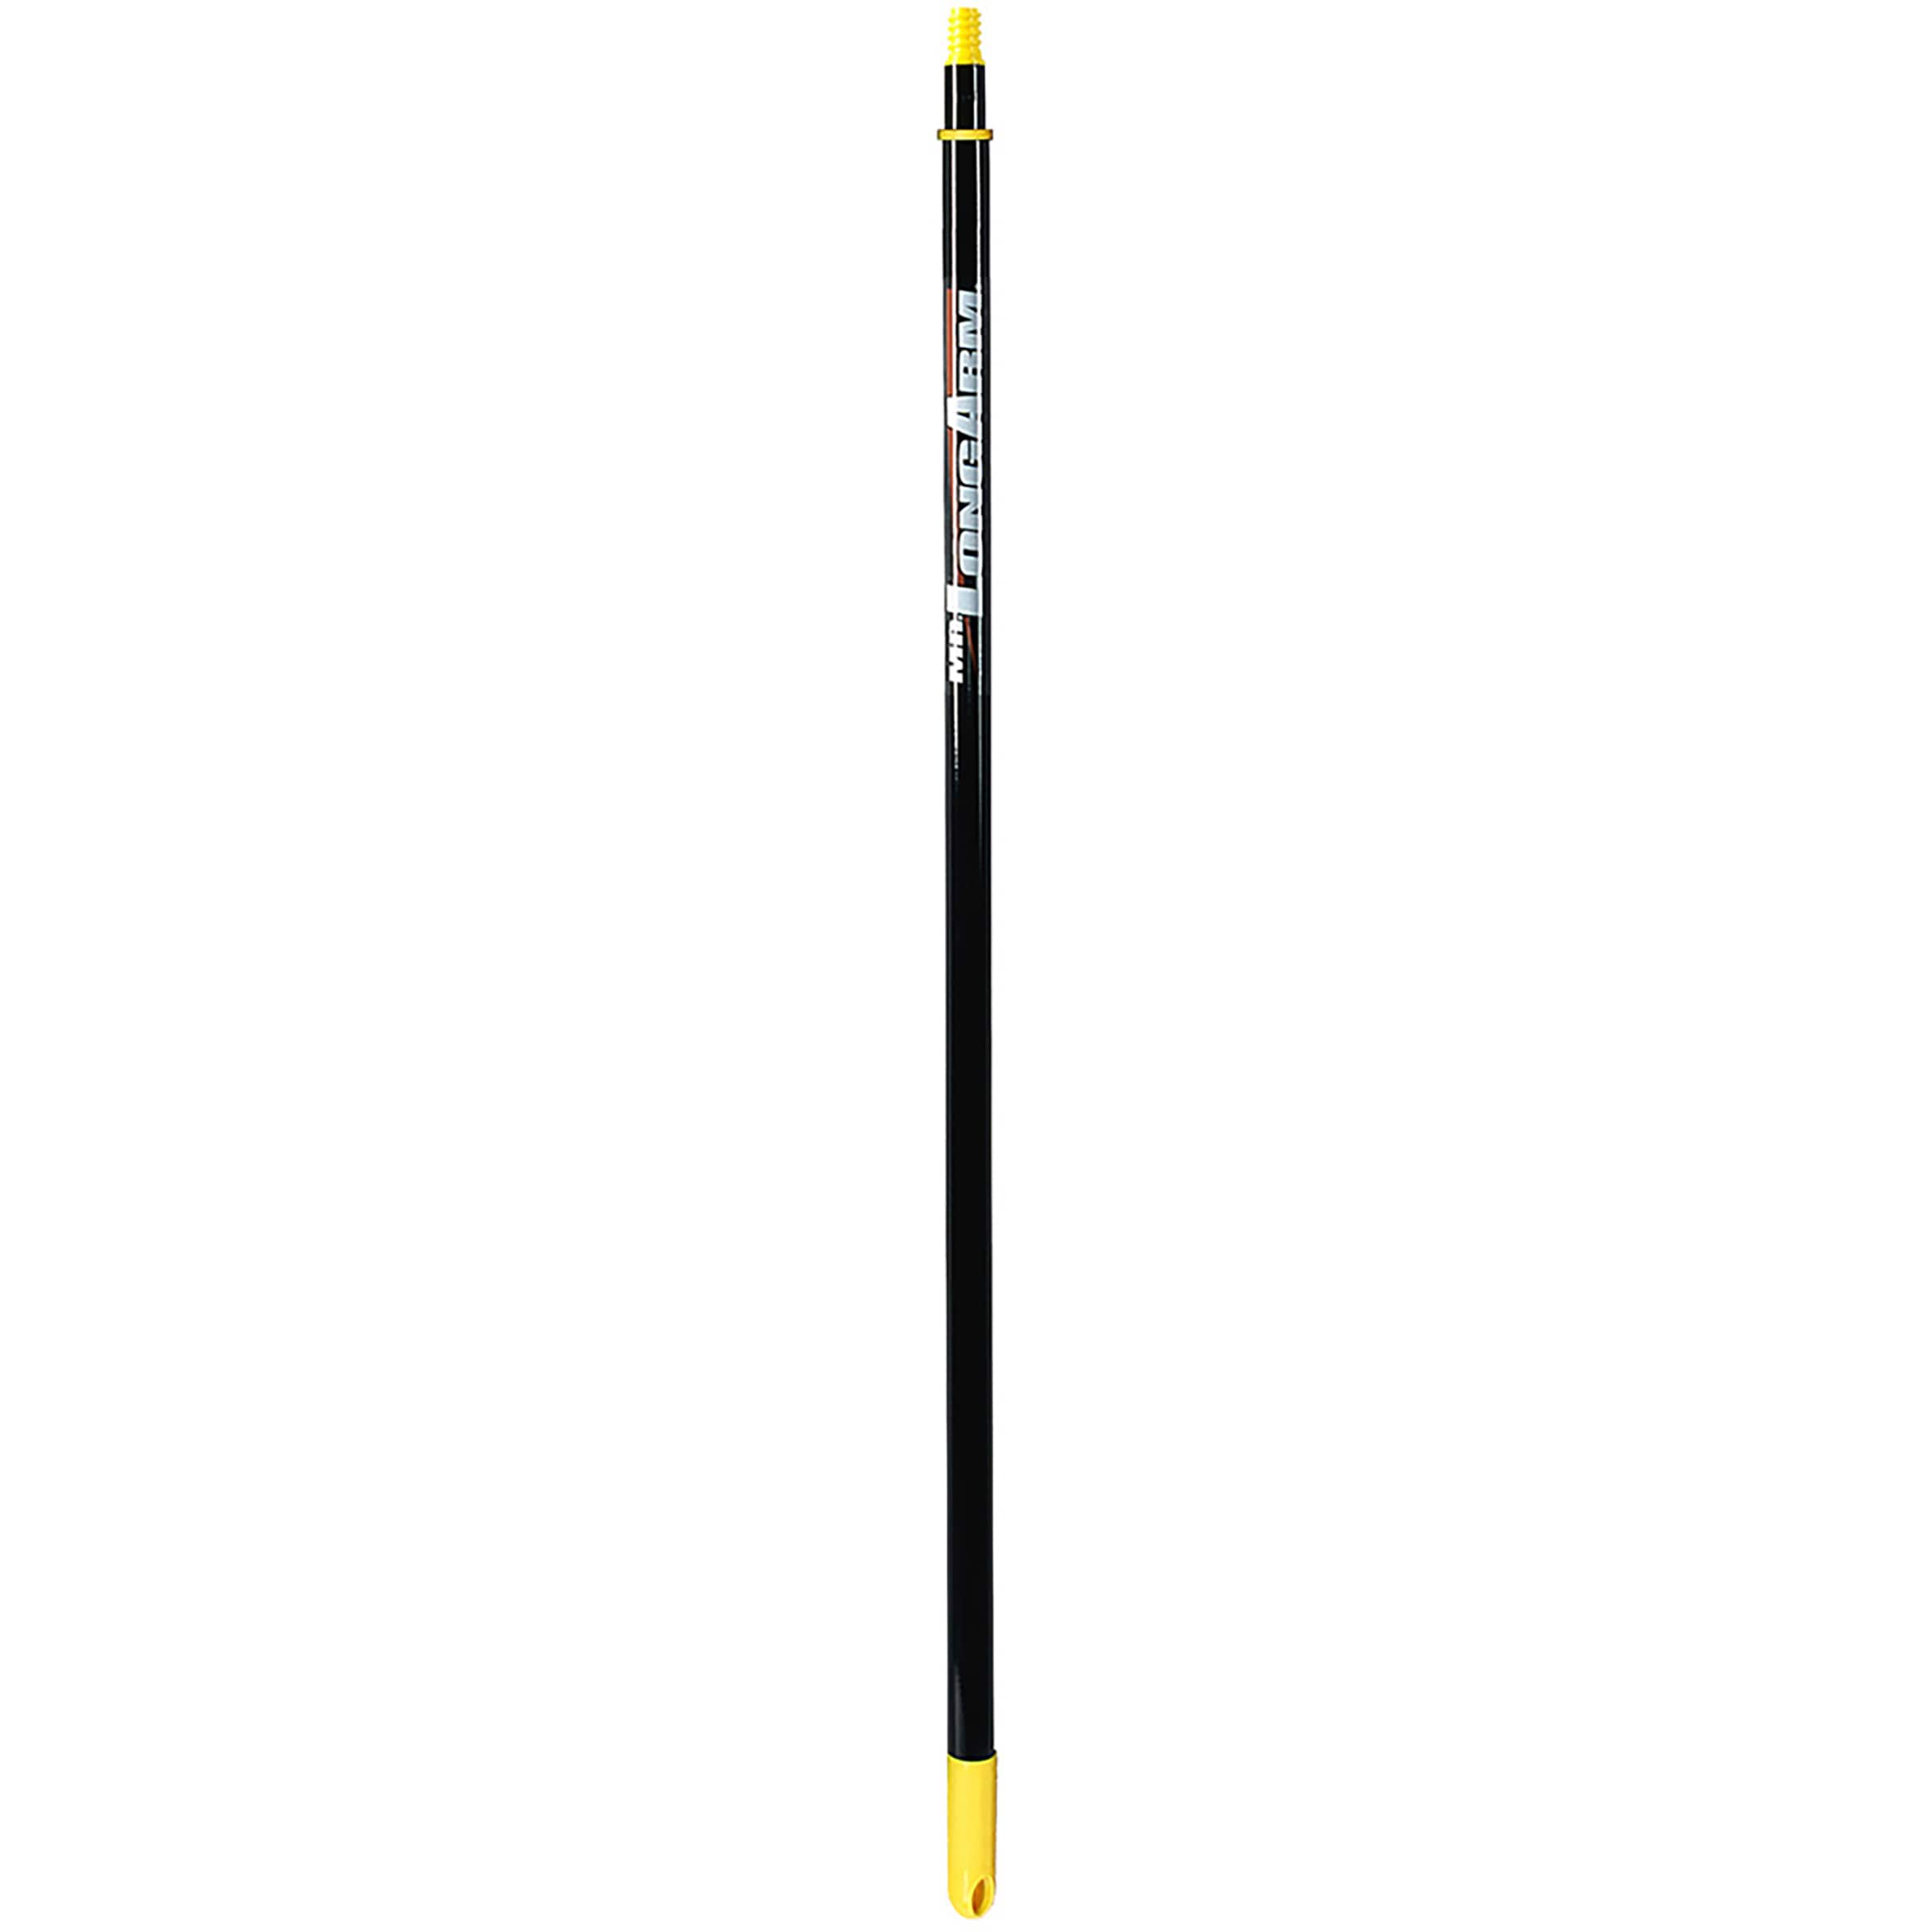 Lowe's 4' to 8' Telescoping Threaded Extension Pole - Each